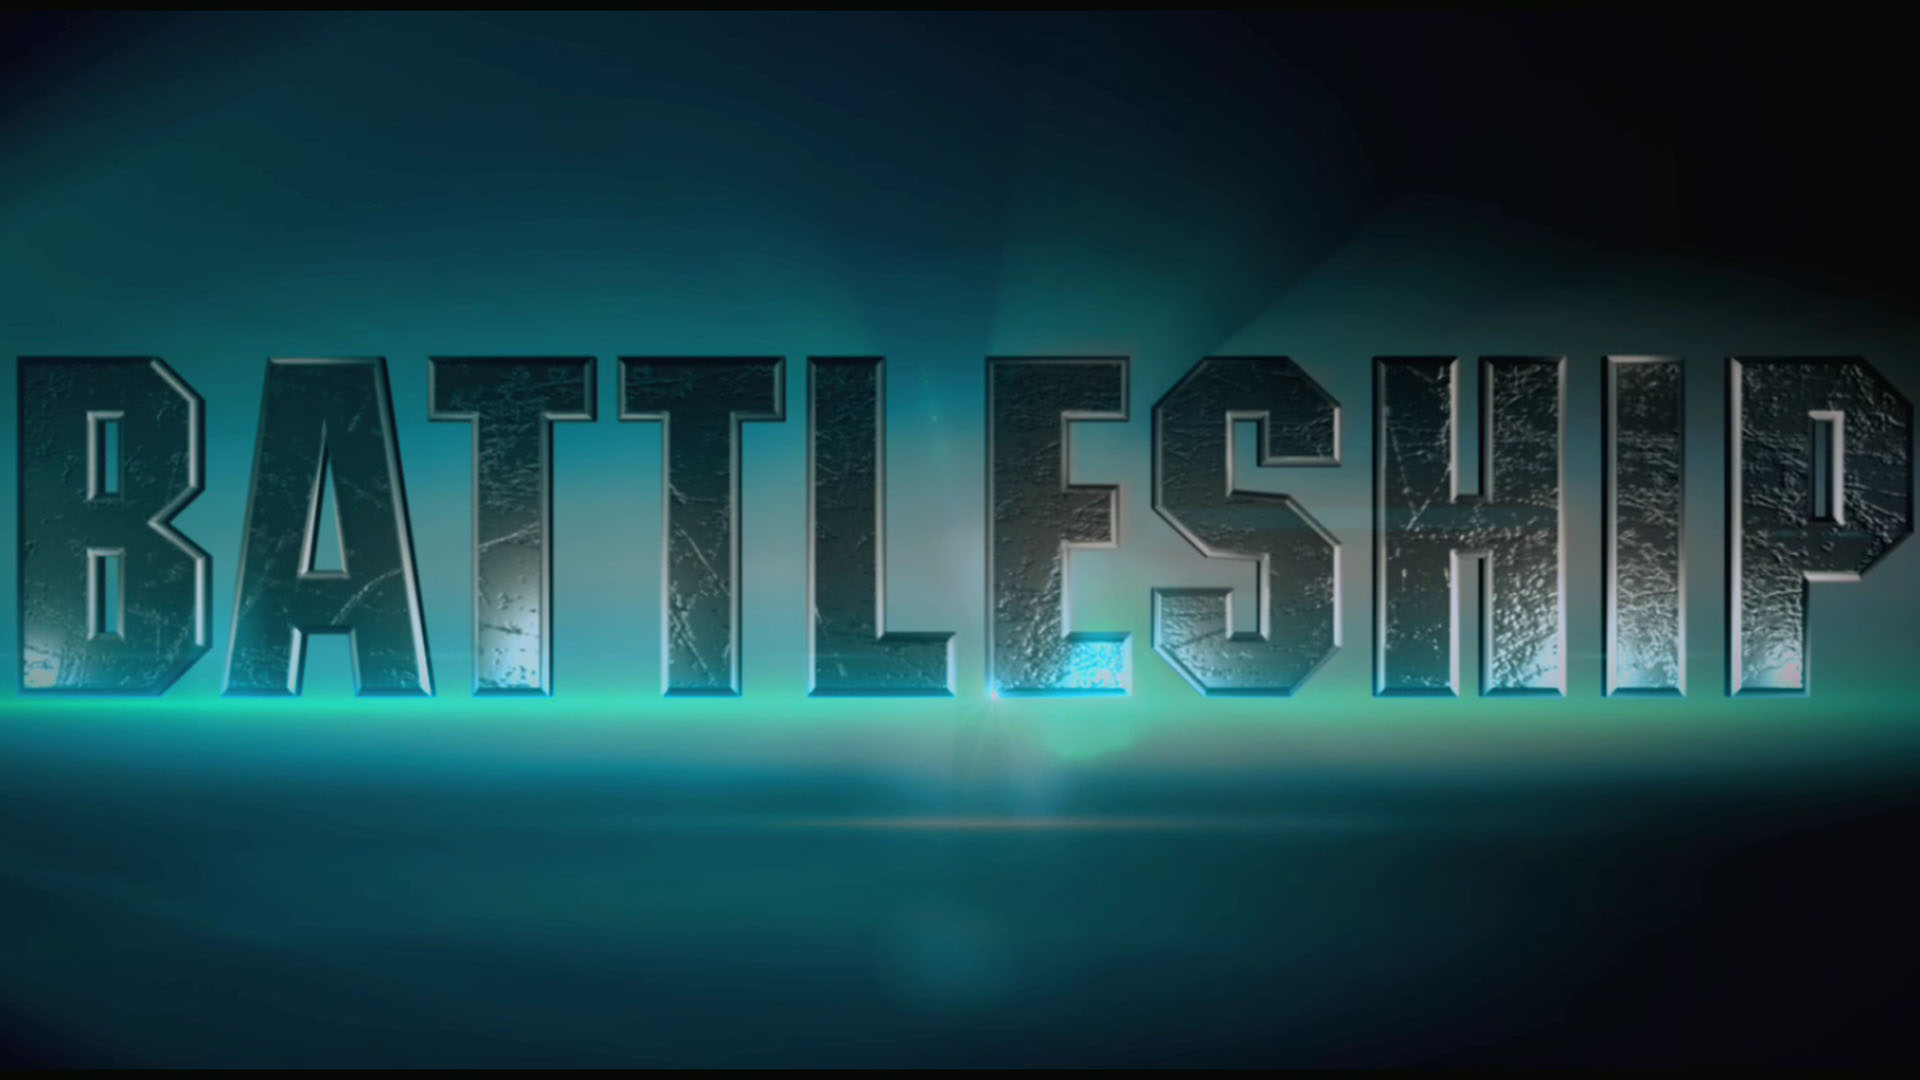 Battleship Free Desktop Wallpapers for HD Widescreen and Mobile